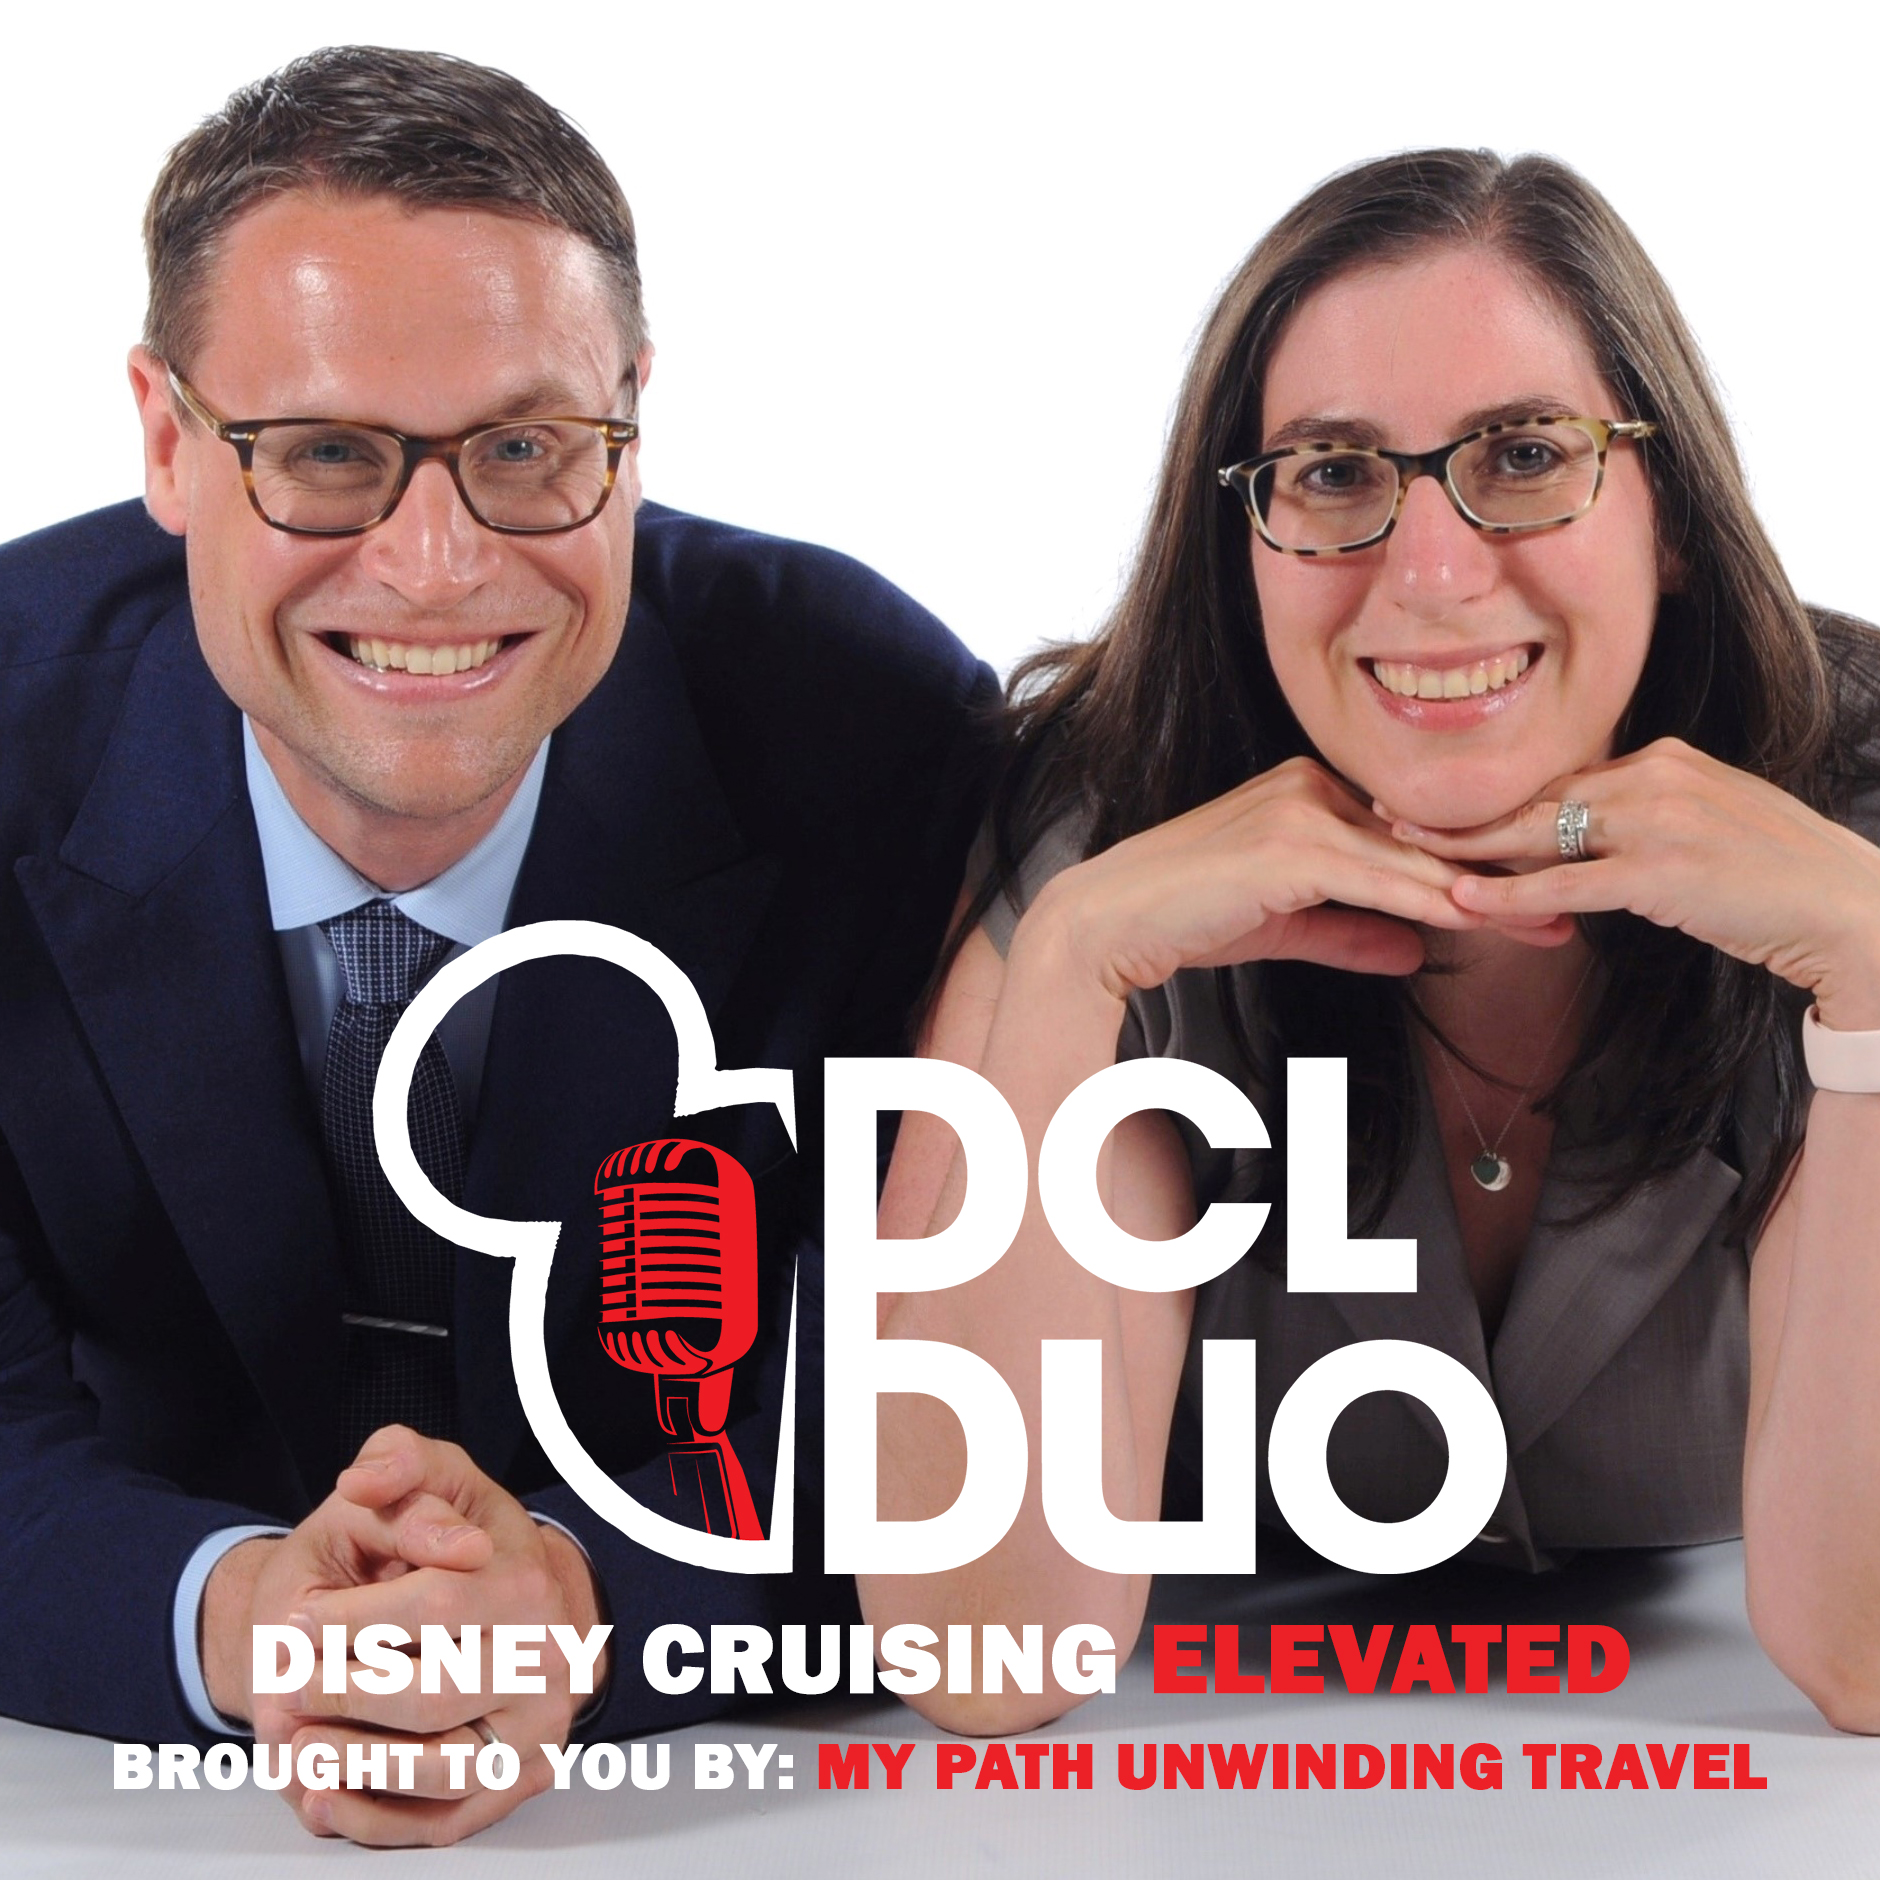 Ep. 346 - Pizza, Volcanoes, and Wine: A Mediterranean Cruise Adventure on Disney Cruise Line